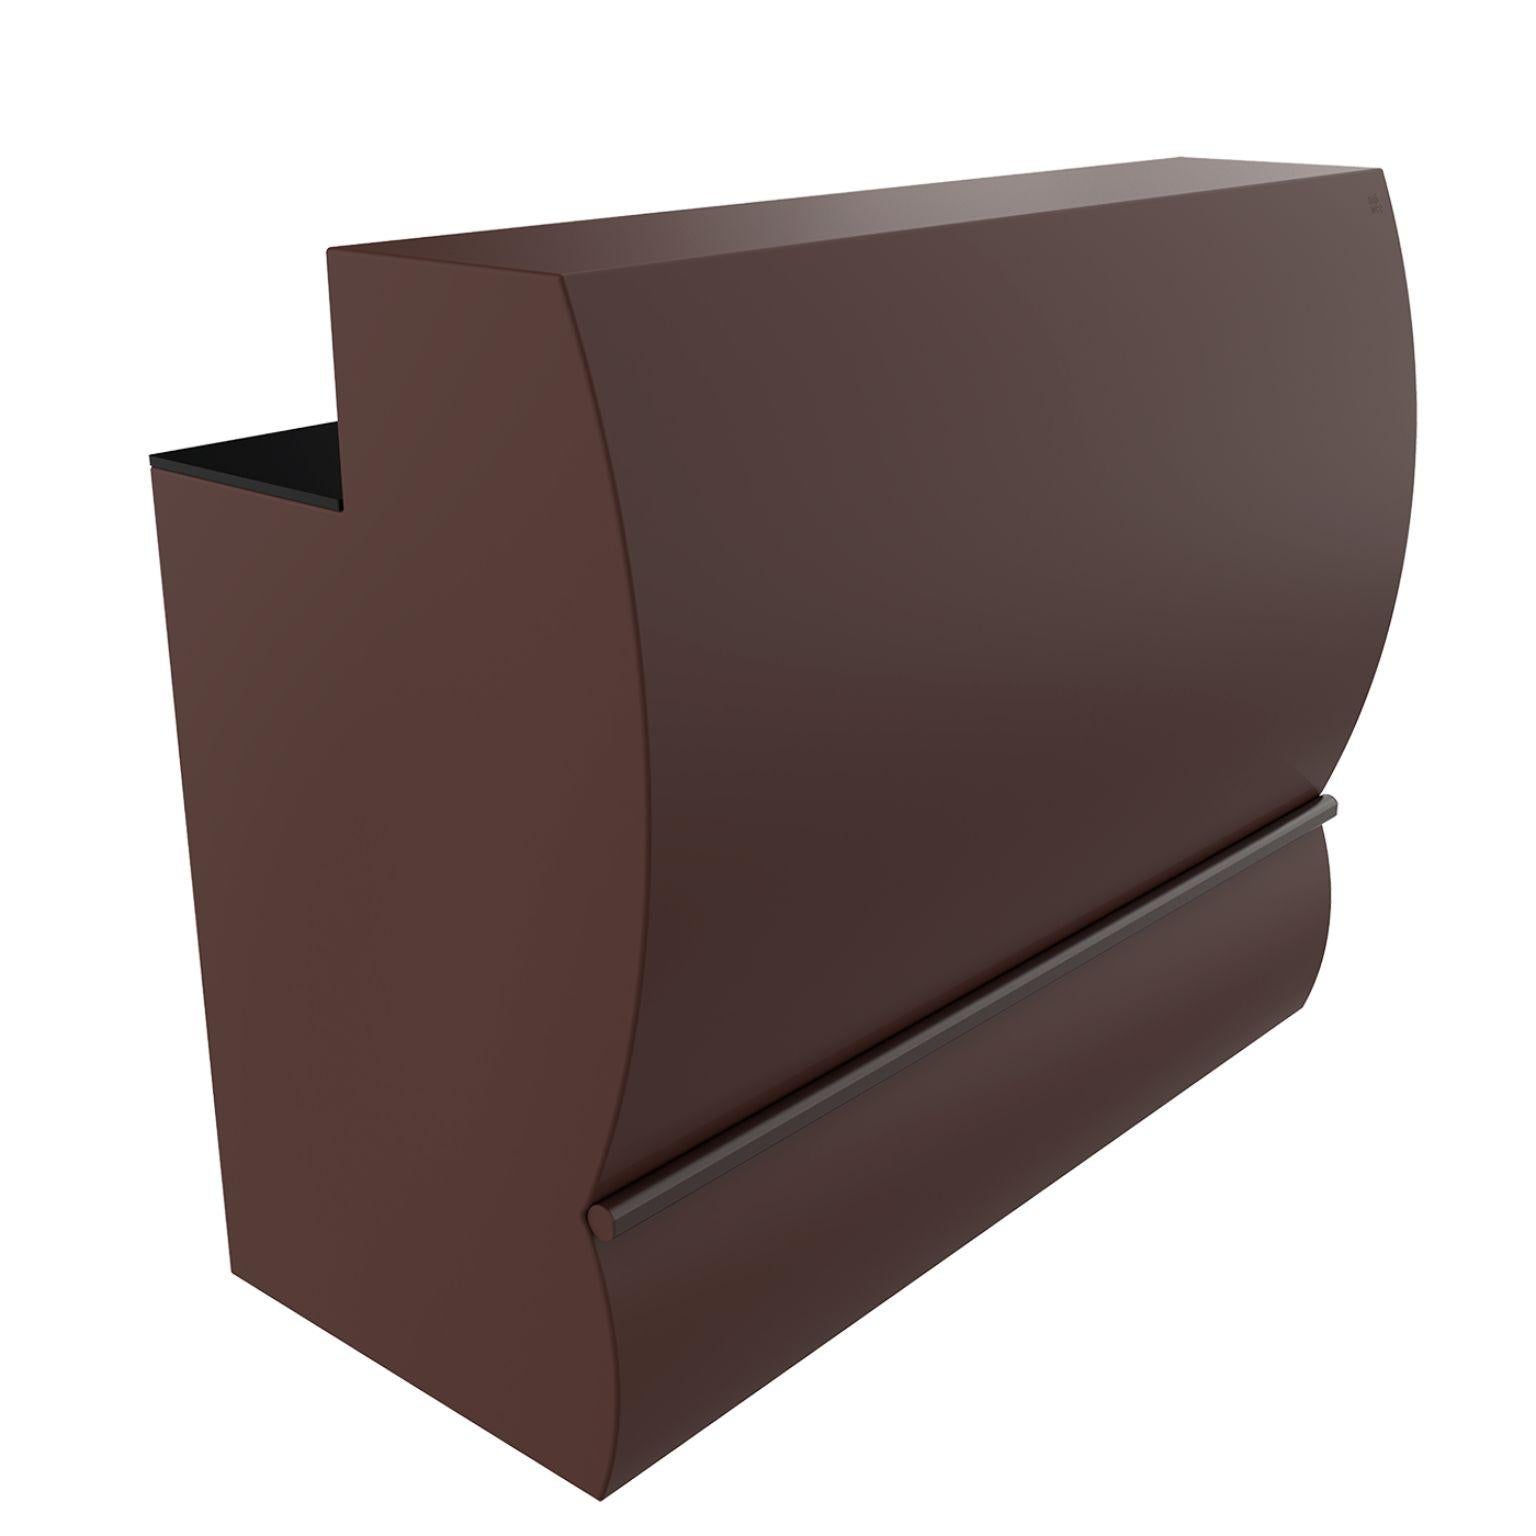 Chocolate straight lace bar by MOWEE
Dimensions: D68 x W140 x H115 cm.
Material: Polyethylene and stainless steel.
Weight: 45 kg.
Also available in different colors and finishes (lacquered, retroilluminated). Optional wheel kit and optional bar